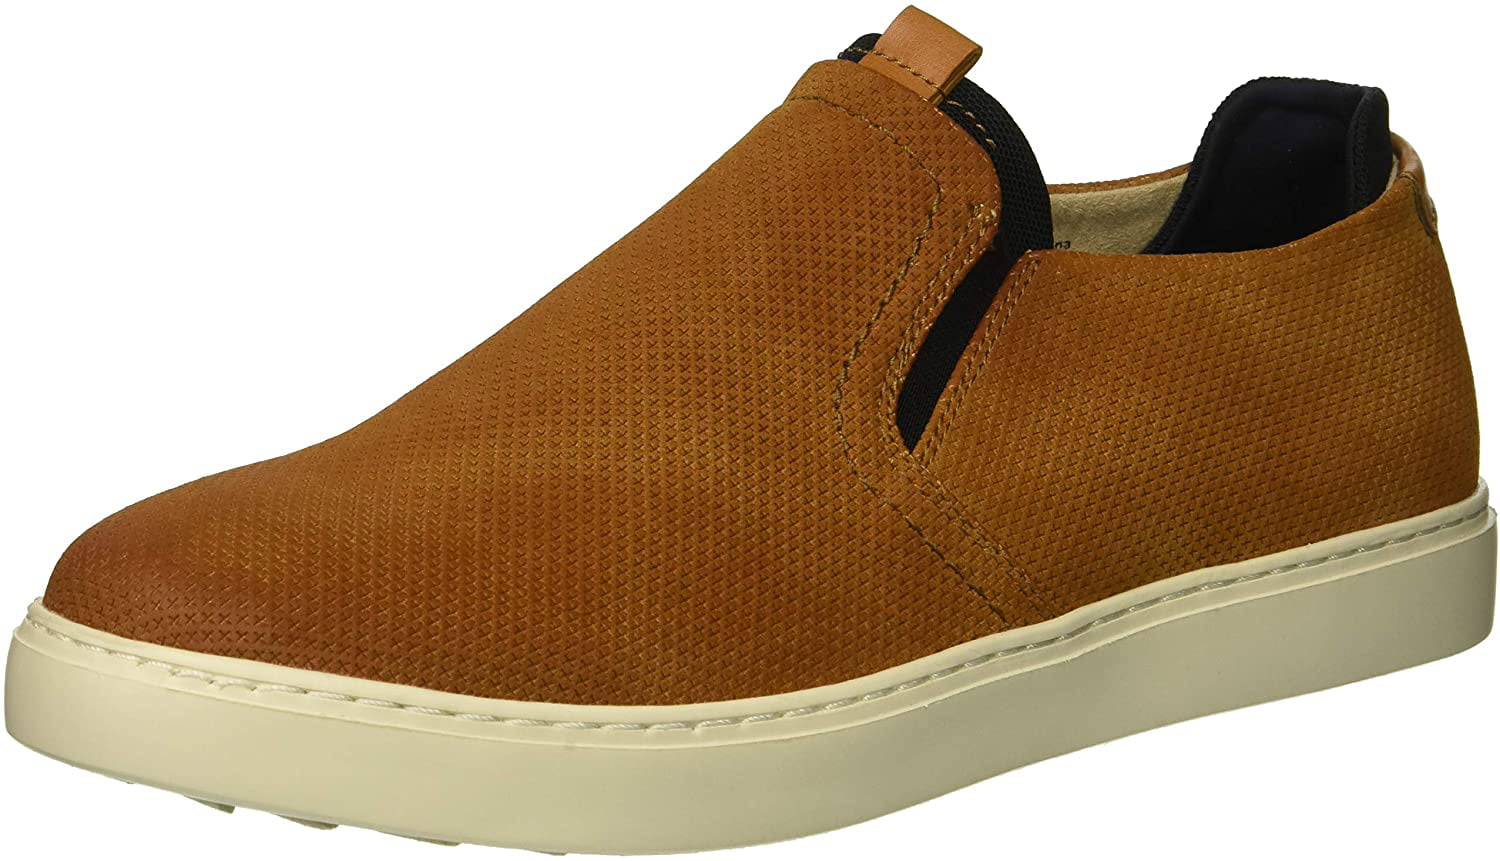 kenneth cole reaction men's indy sneaker